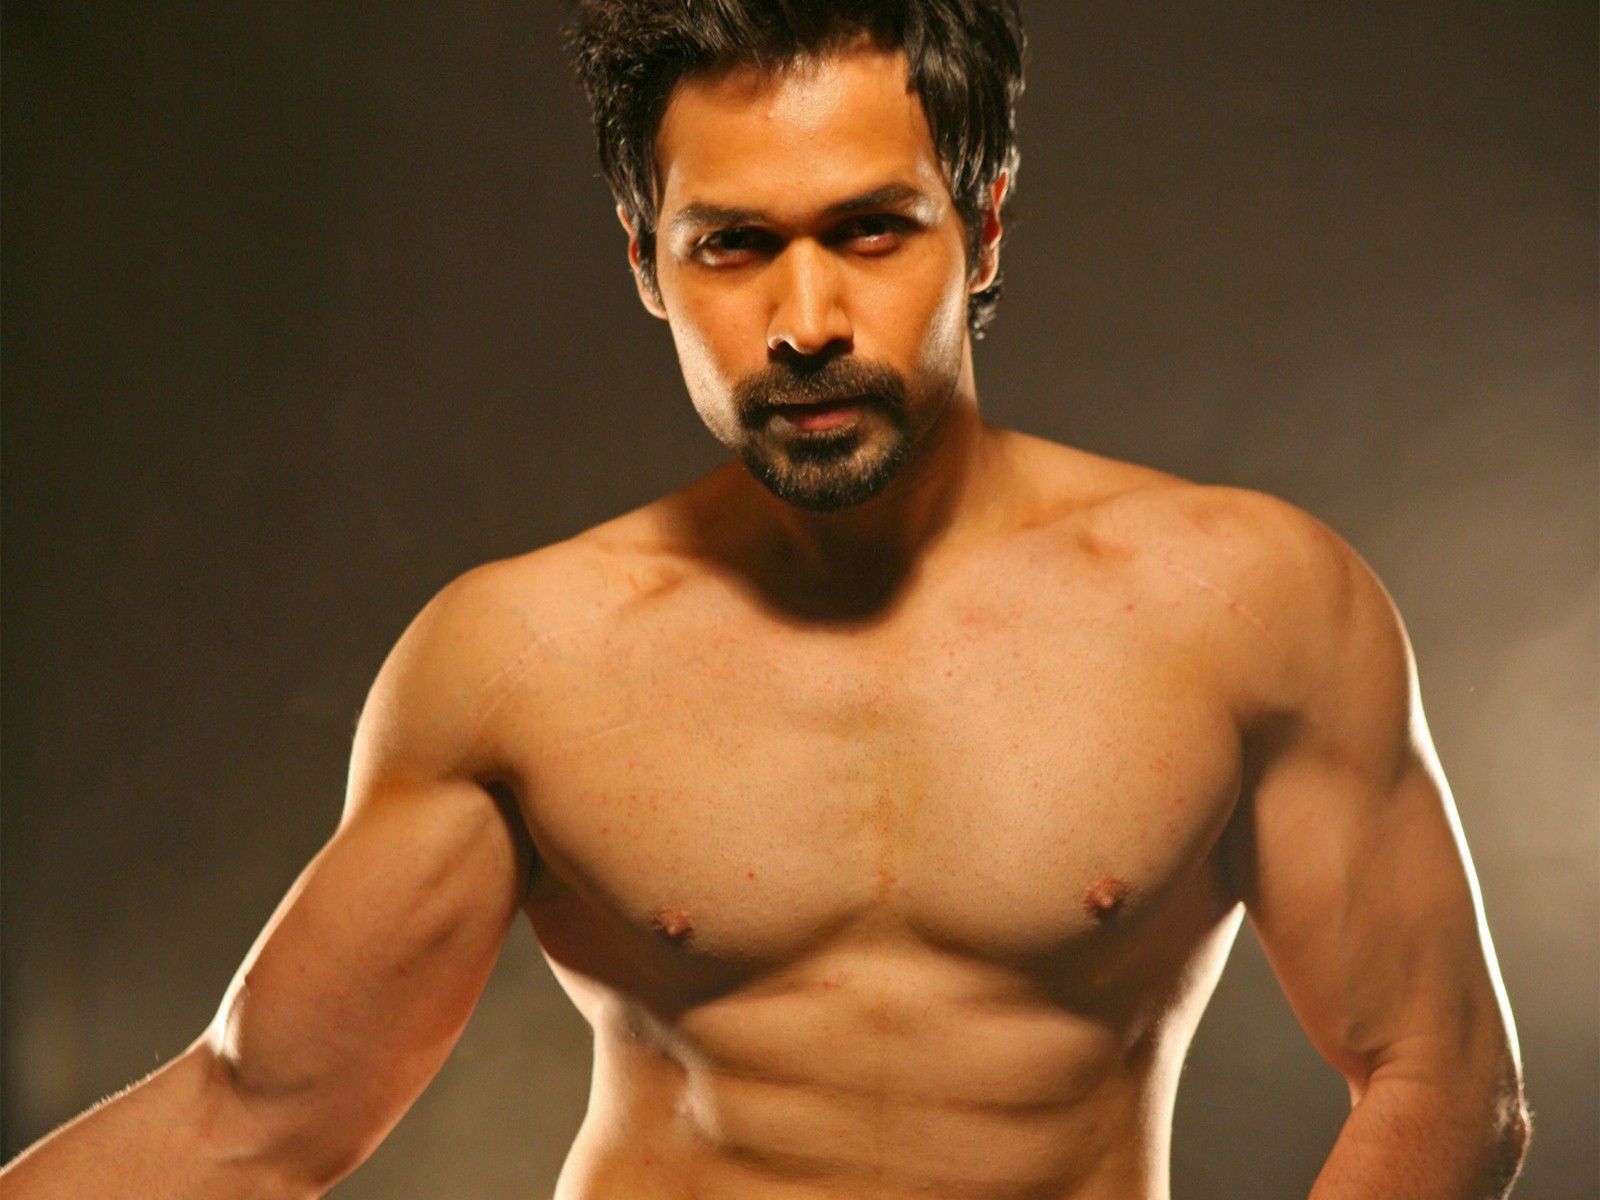 Six Pack Abs Body of Bollywood Hero Emraan Hashmi Photo. HD Wallpaper, Image, Picture, Photo. Abs, Photo, Bollywood actors